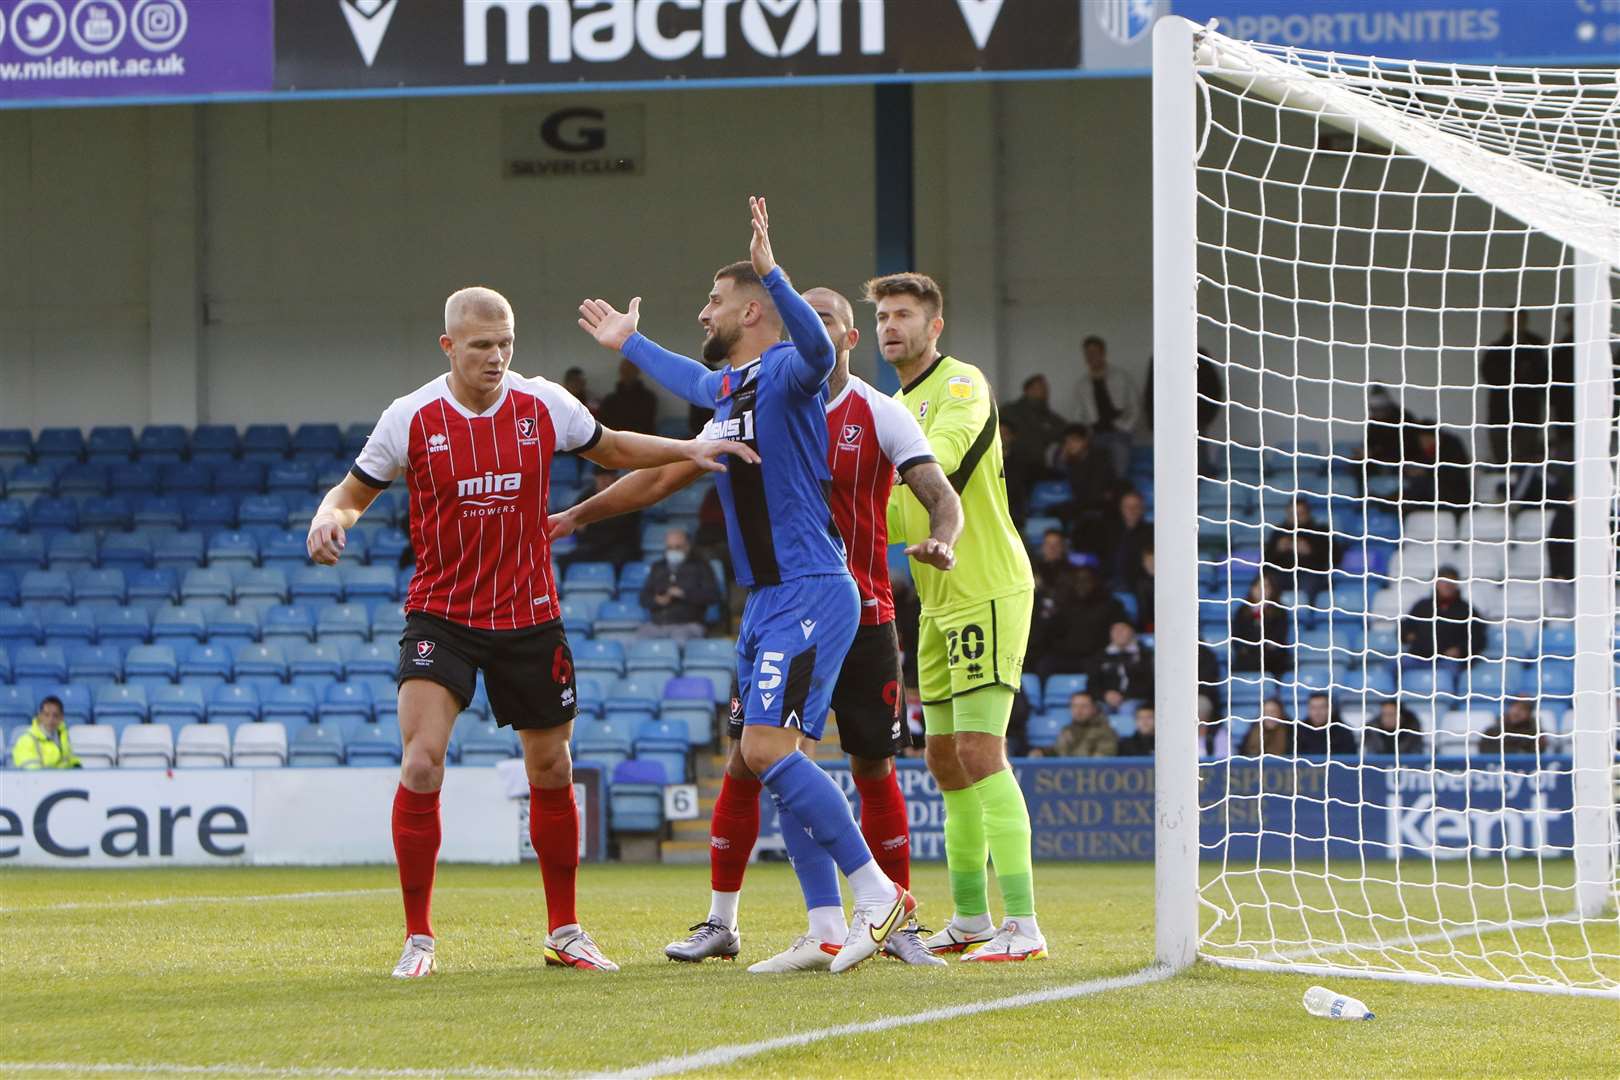 Gillingham will hope to have defender Max Ehmer back soon